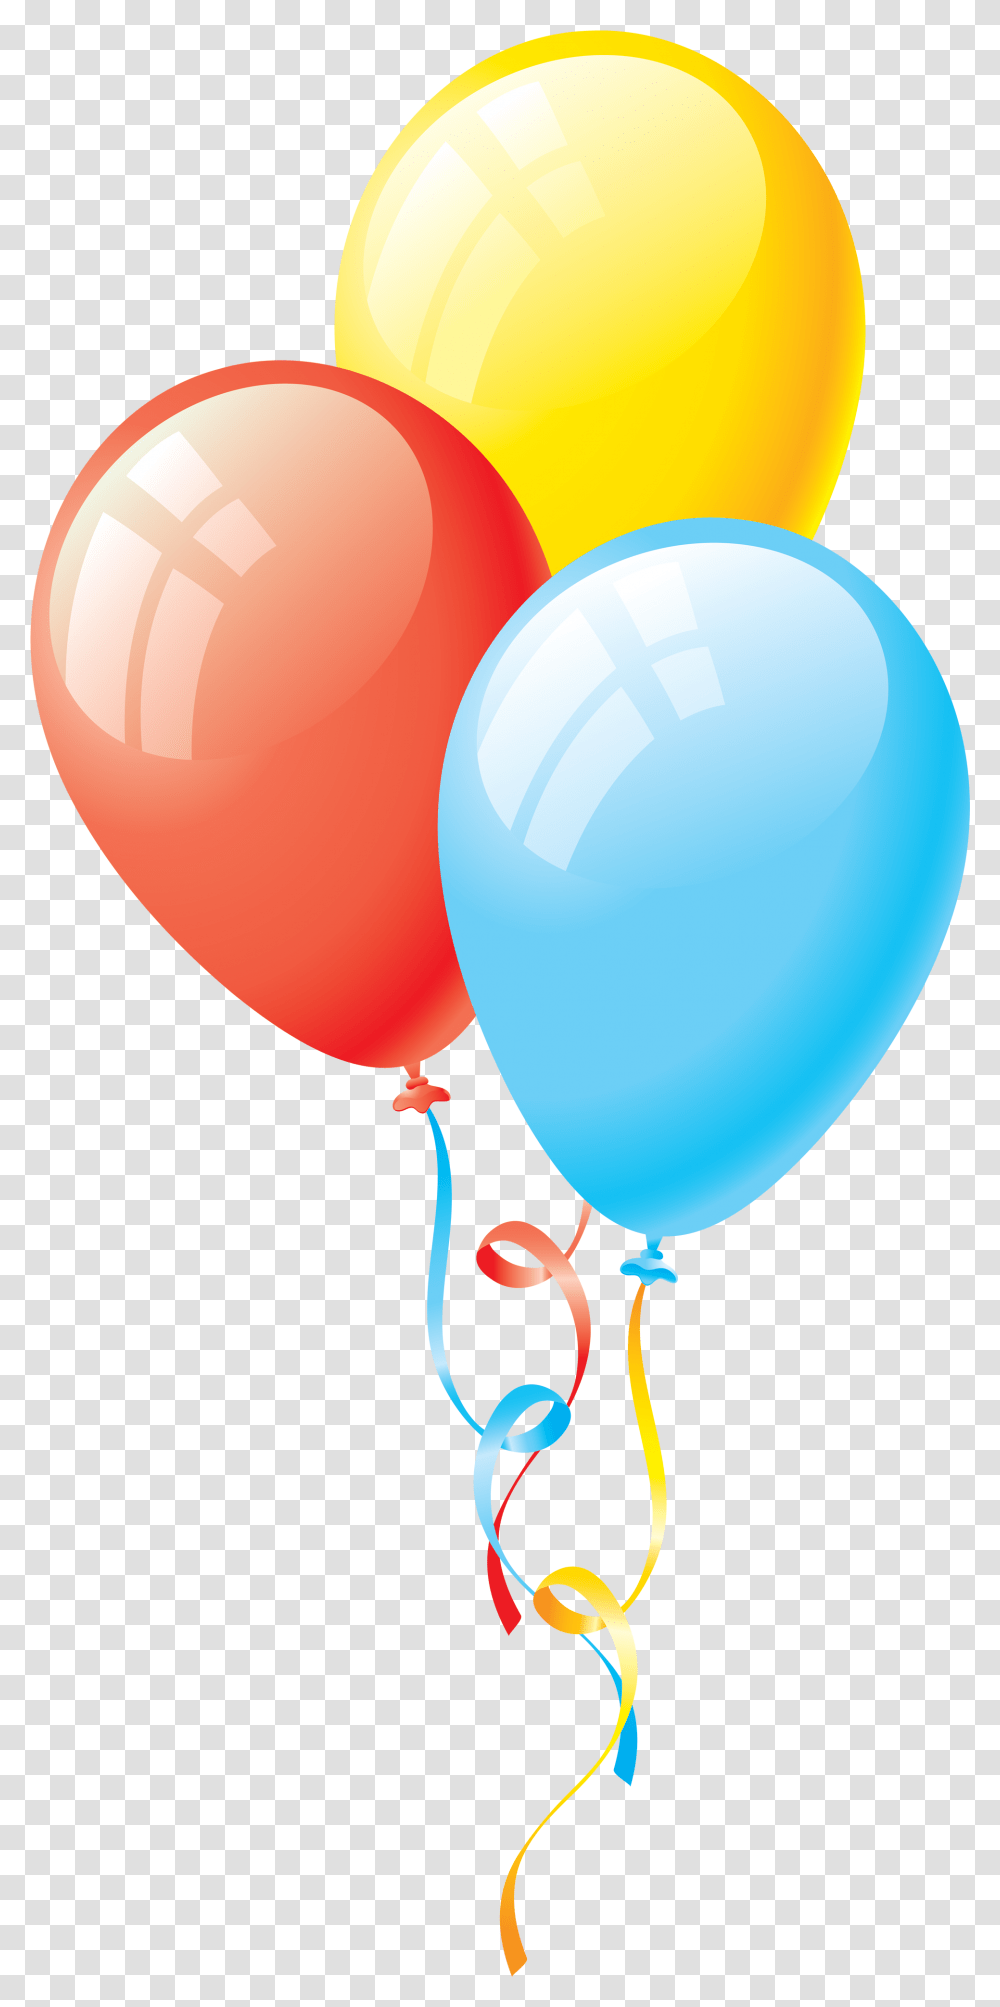 Colorful Balloon Image Free Birthday Balloons Clip Art Transparent Png